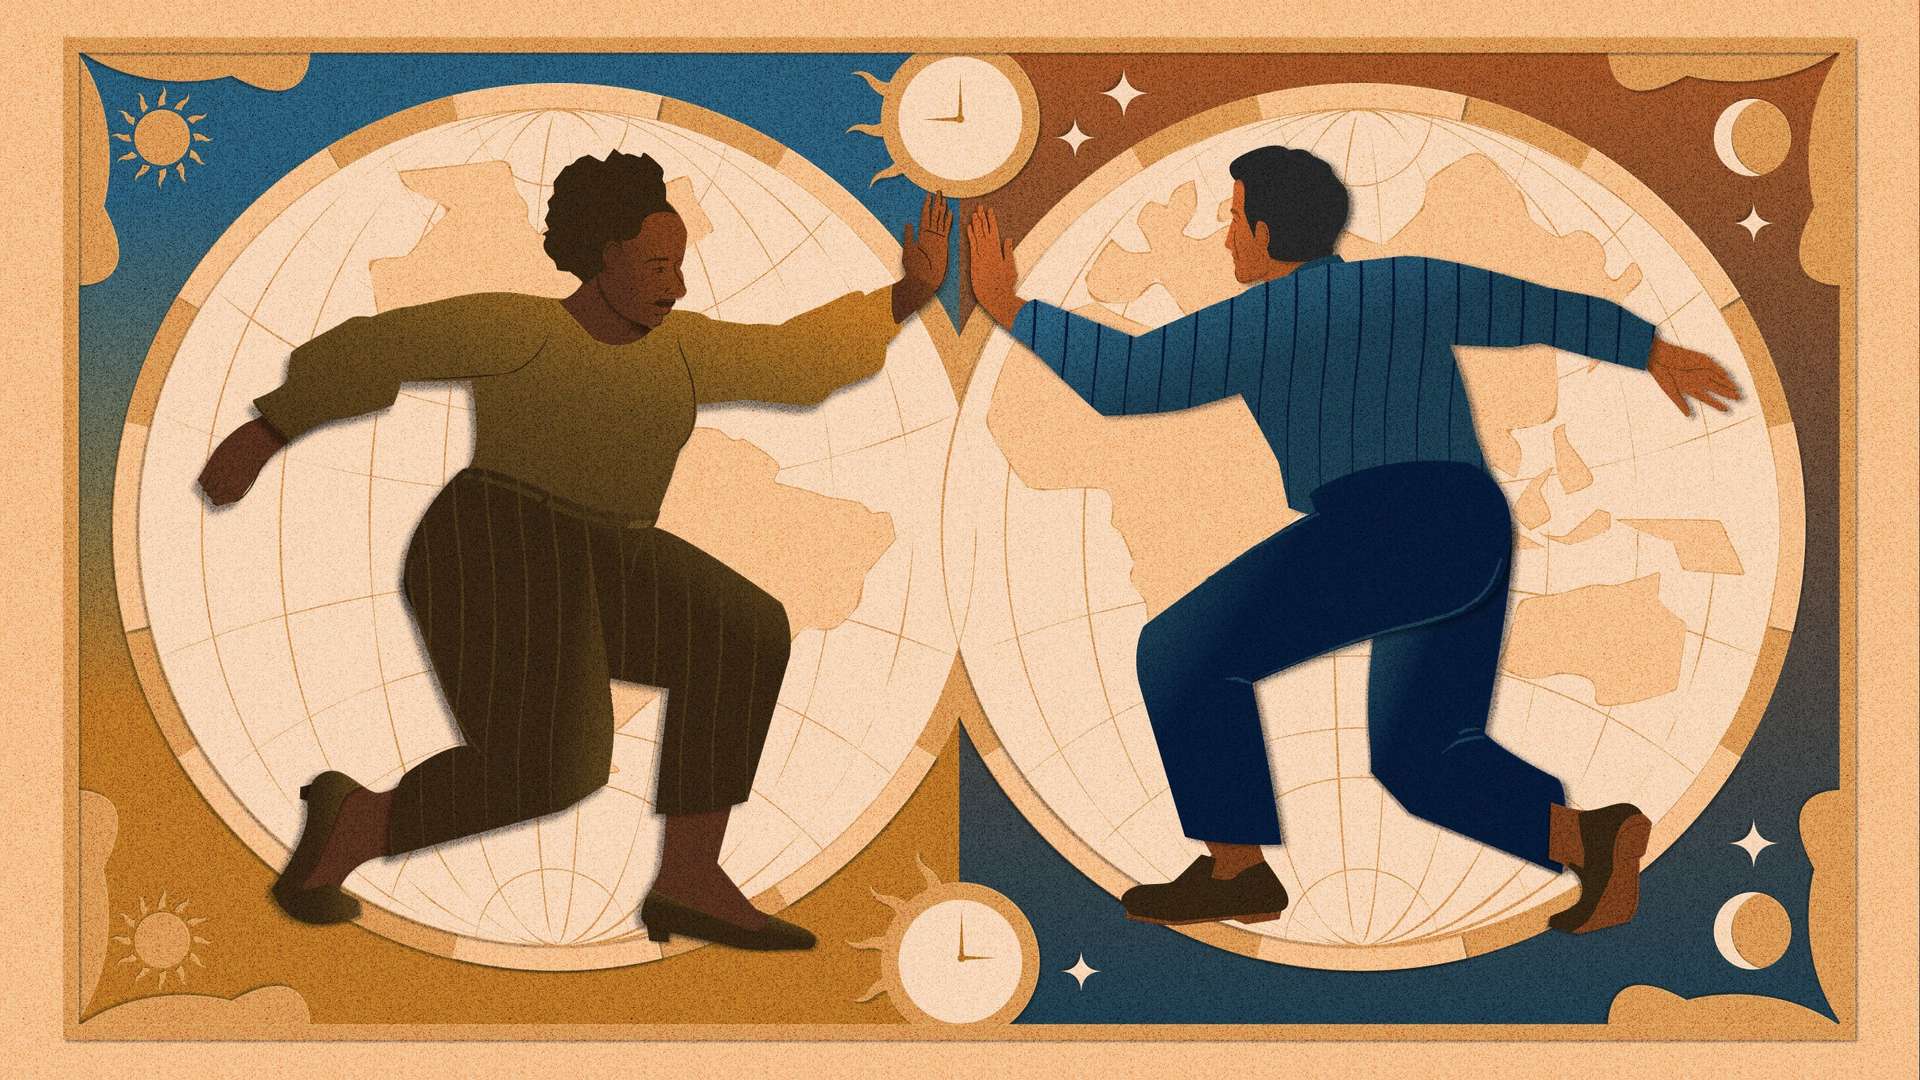 Two people high-fiving against a background split into the western and eastern hemispheres, as well as day and night. Clocks show two different times: 9 am and 3 pm.